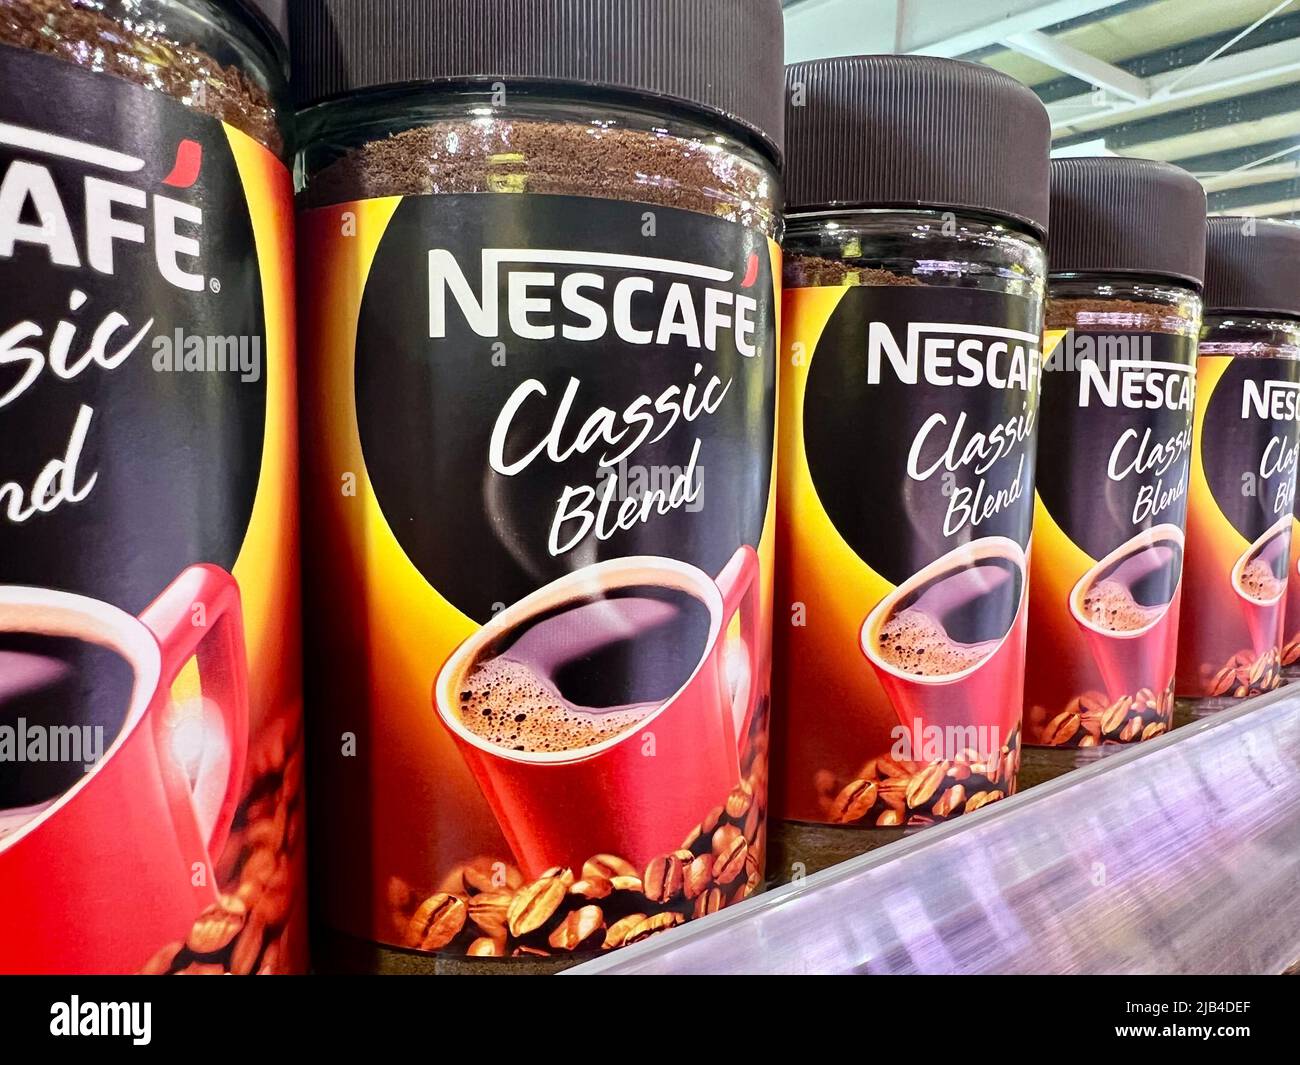 Nescafe Classic Blend Coffee on a shelf at a supermarket Stock Photo